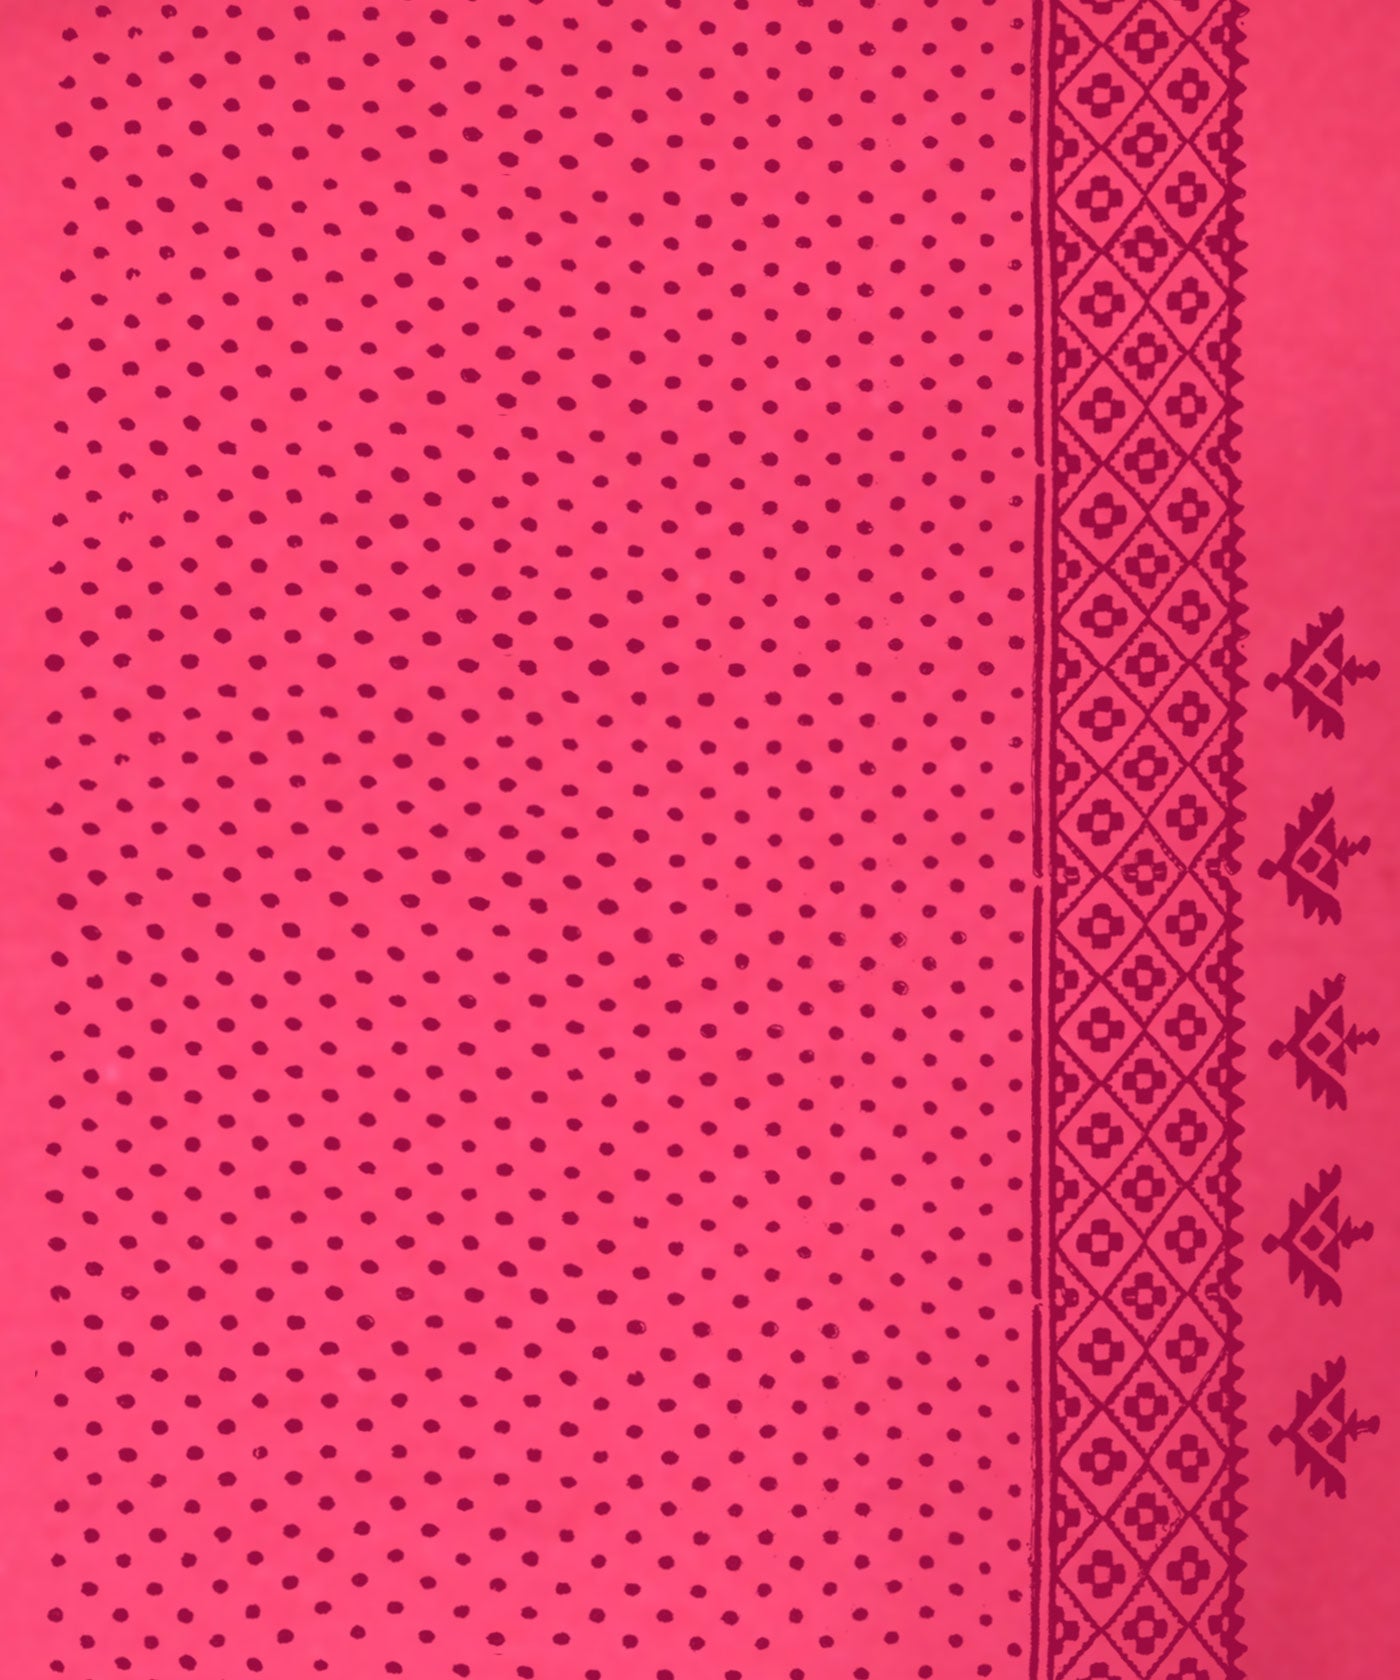 Not All Over - Block Print Tees for Women - Magenta